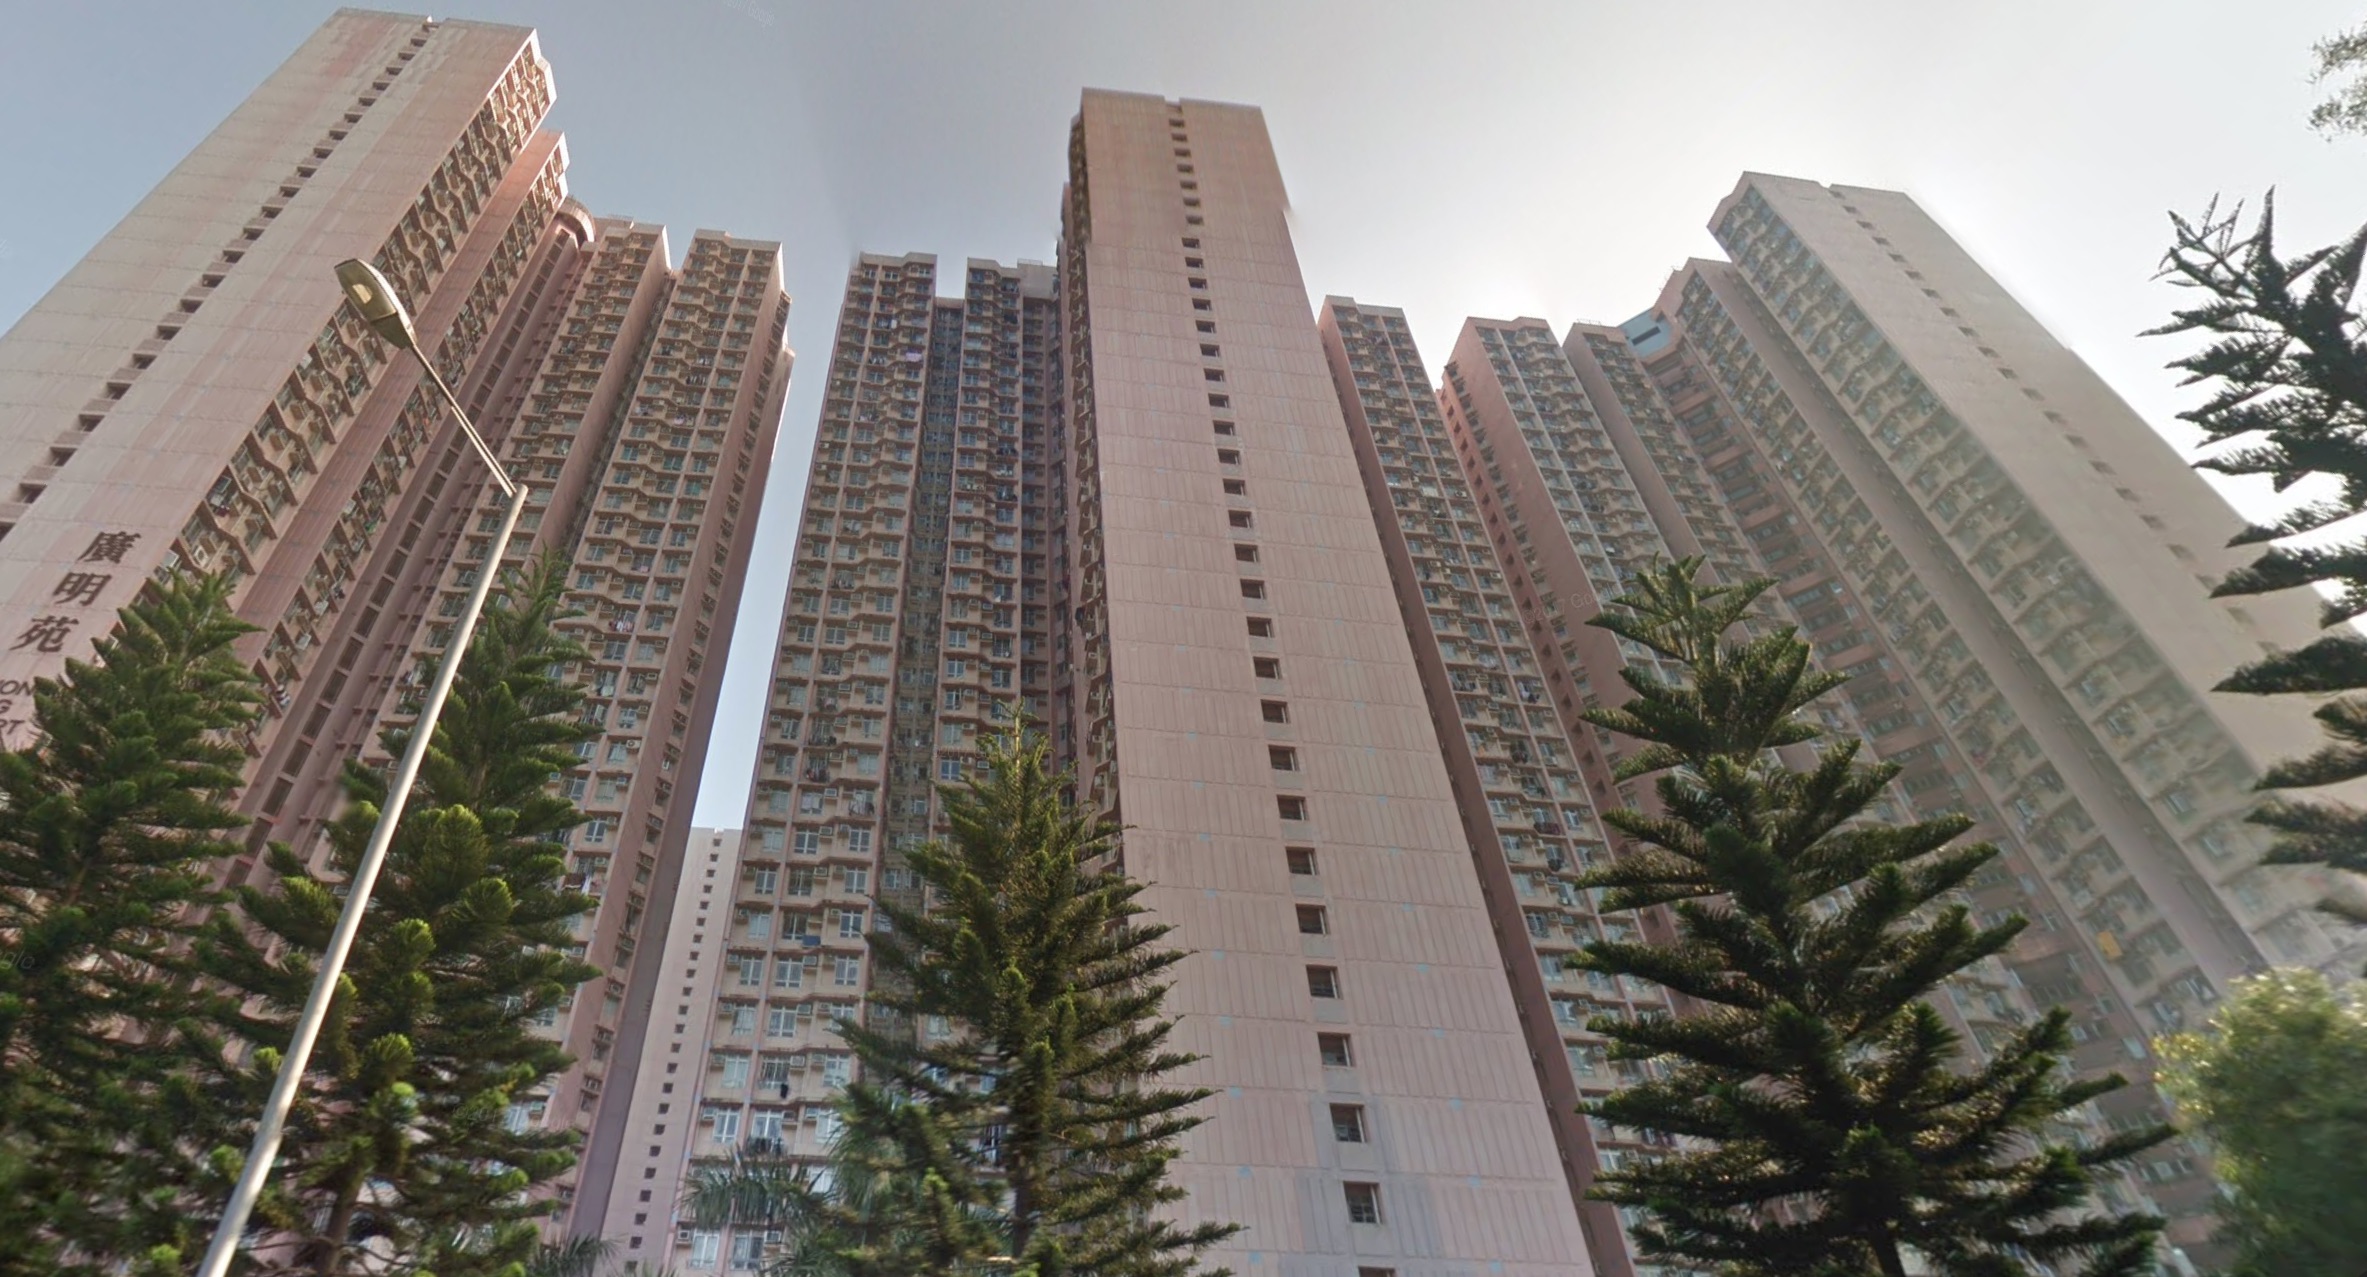 Kwong Ming Court apartment complex in Tseung Kwan O. Picture: Google